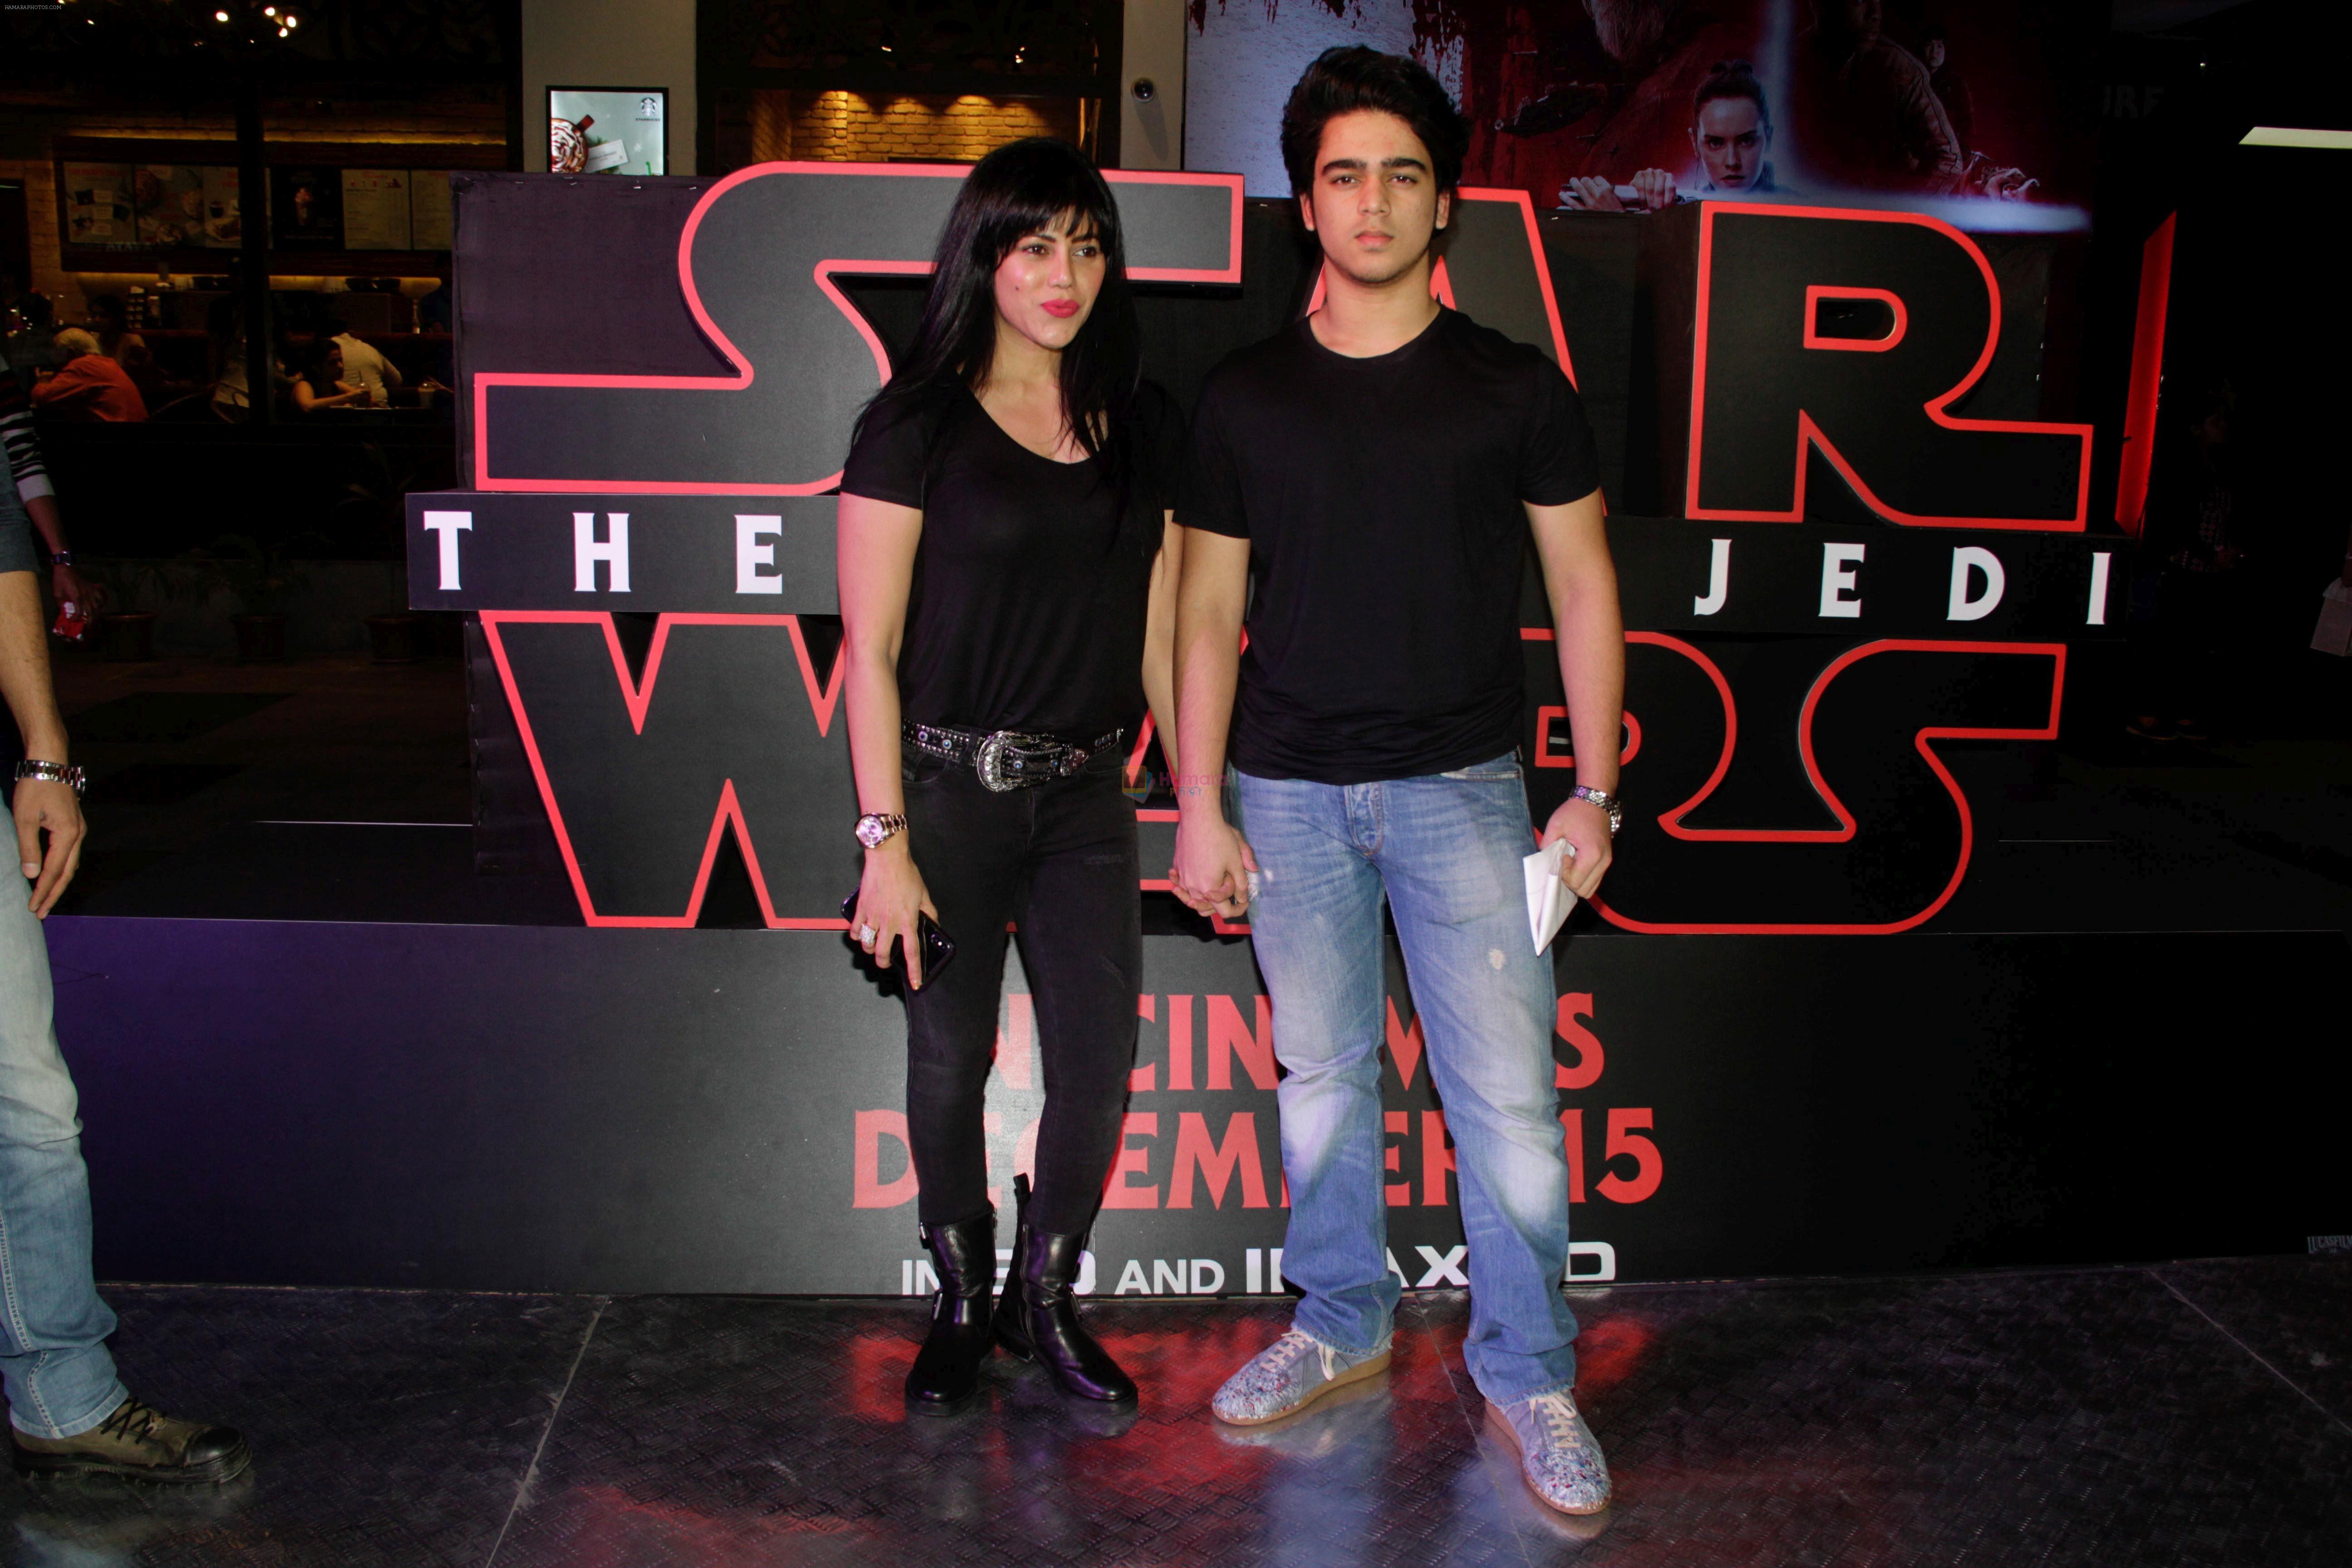 at the Red Carpet Premiere Of 2017's Most Awaited Hollywood Film Disney Star War on 13th Dec 2017